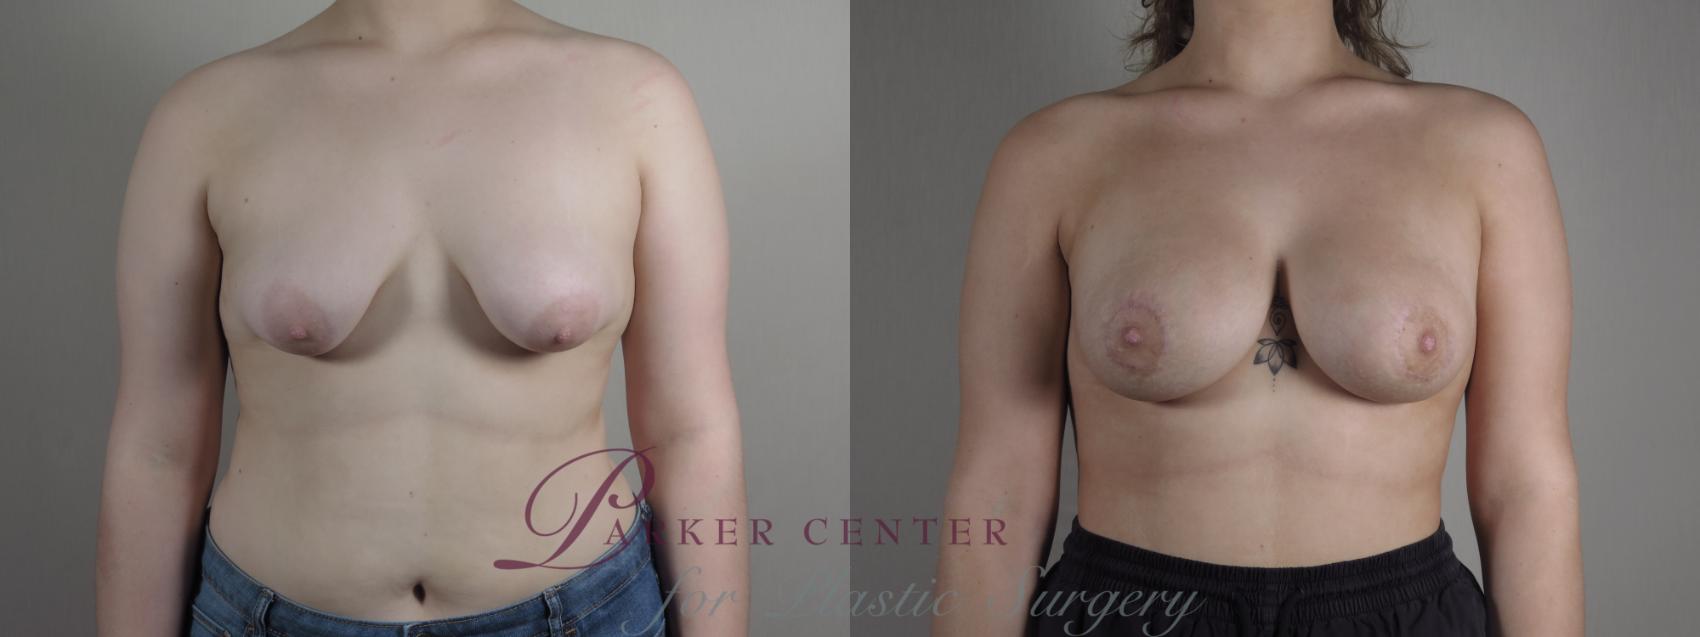 Correction of Tubular Breasts Case 1217 Before & After View #1  | Paramus, NJ | Parker Center for Plastic Surgery